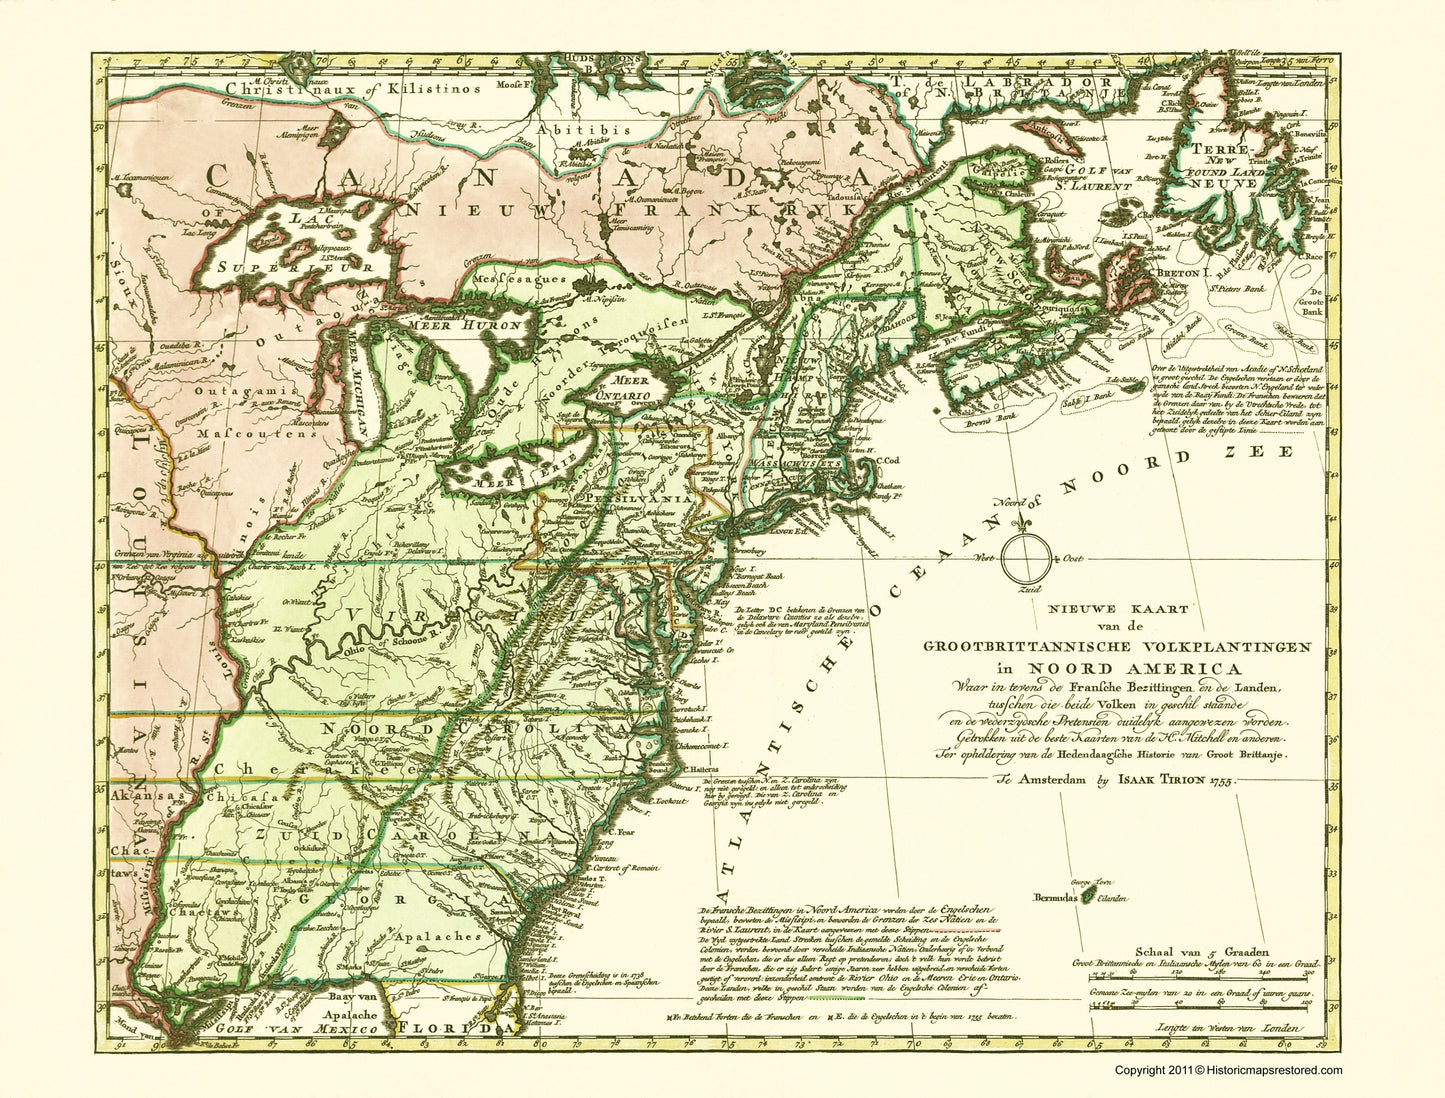 Historic Revolutionary War Map - North America Great Britain Colonies - Tirion 1755 - 23 x 25.73 - Vintage Wall Art